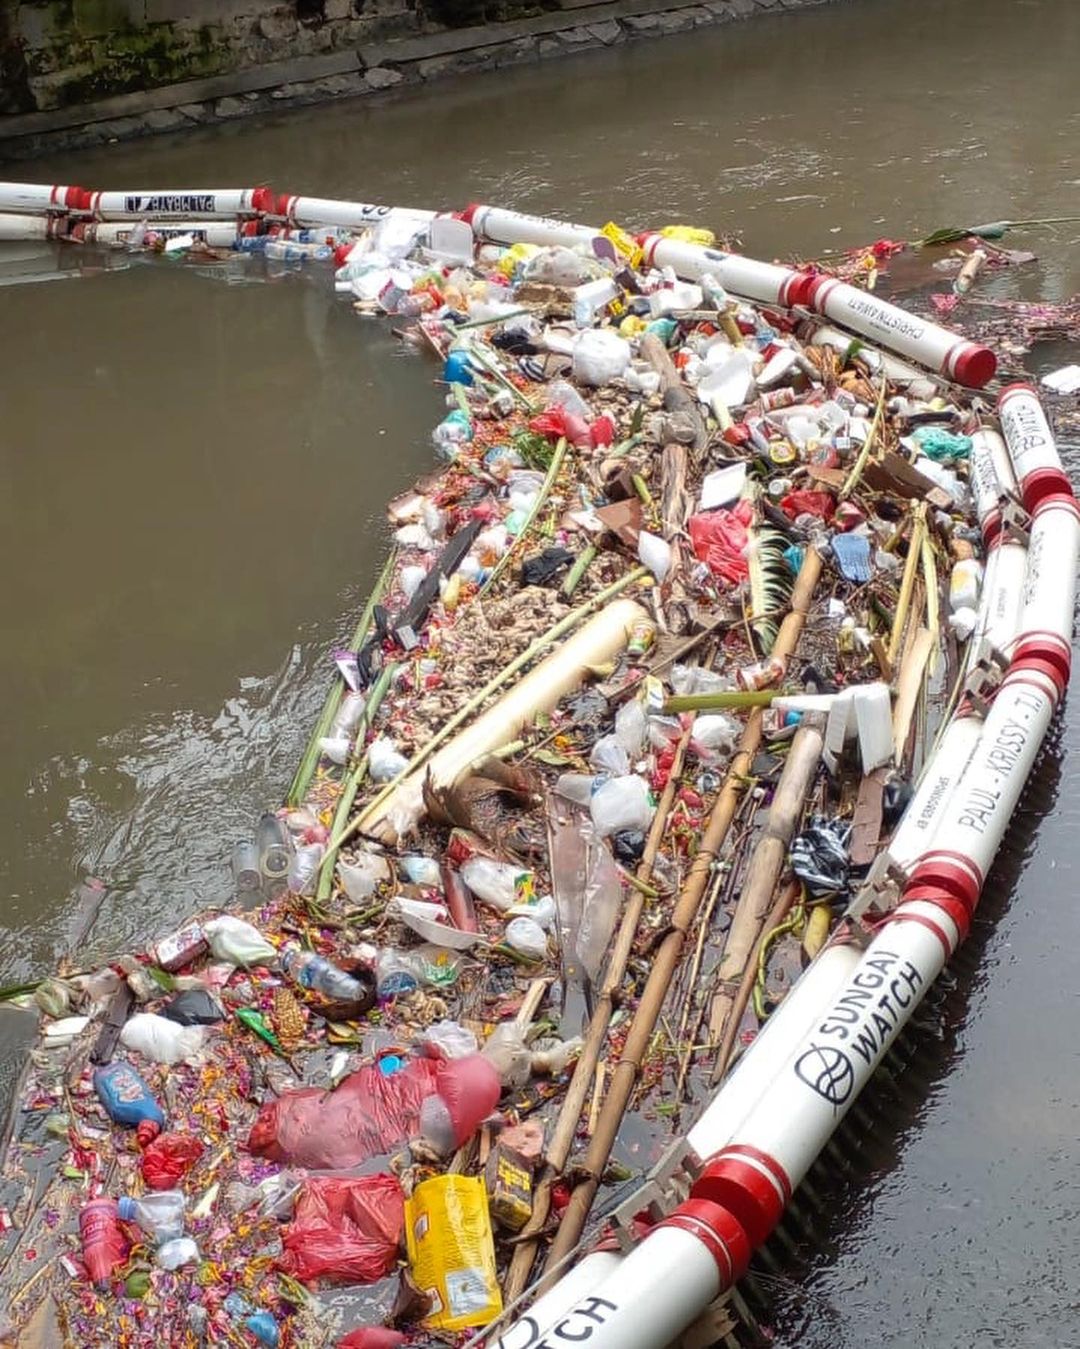 Sungai Watch believes every waste they collect has value, and they are currently experimenting with ways to turn trash into products. “We believe that one of the simplest ways to clean our ocean is by starting in our rivers, where we can still prevent the flow of plastics.”